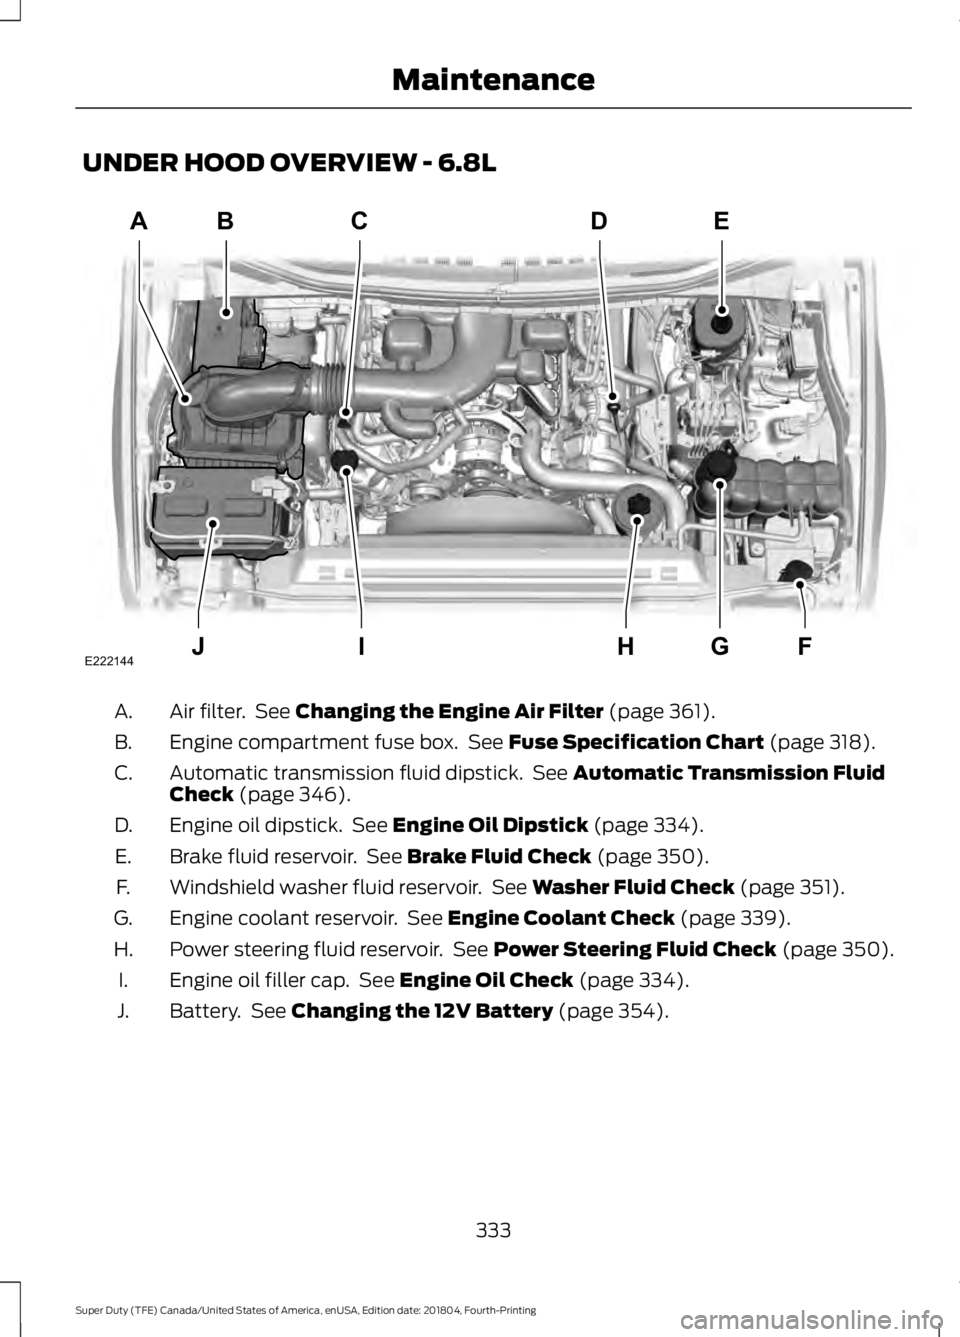 FORD F-550 2019  Owners Manual UNDER HOOD OVERVIEW - 6.8L
Air filter.  See Changing the Engine Air Filter (page 361).
A.
Engine compartment fuse box.  See 
Fuse Specification Chart (page 318).
B.
Automatic transmission fluid dipsti